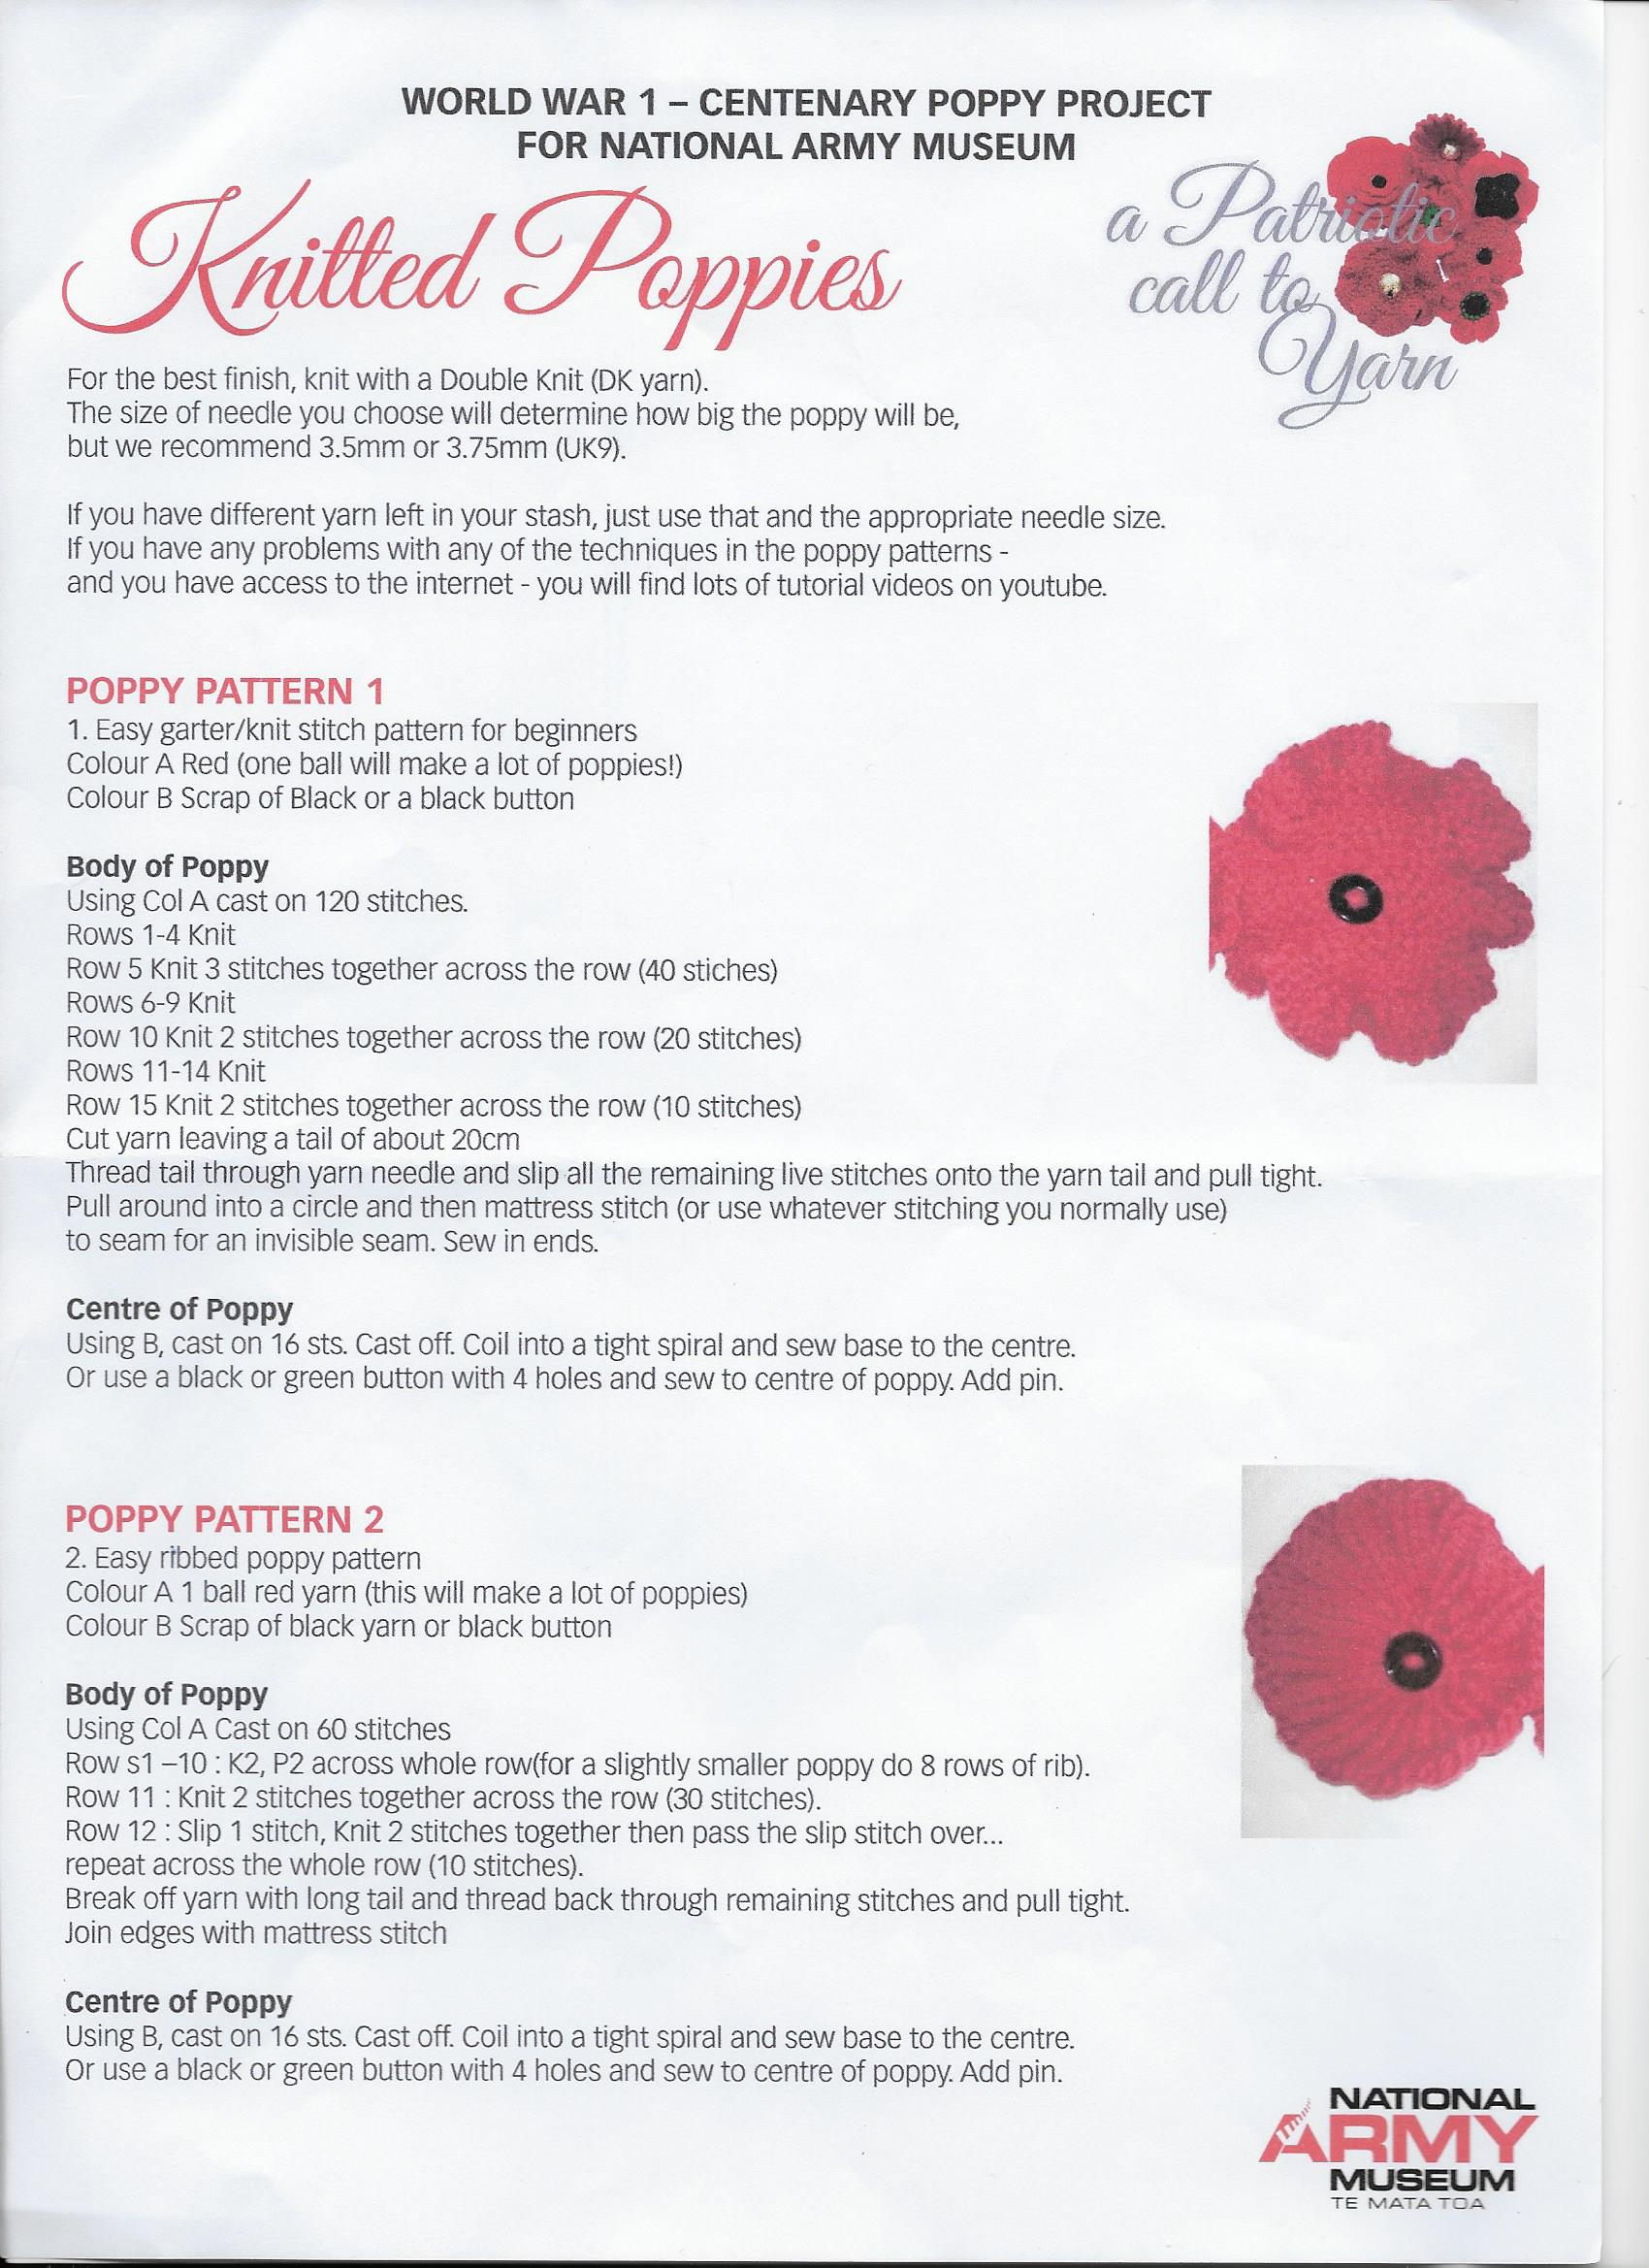 Knitted Poppies - pattern